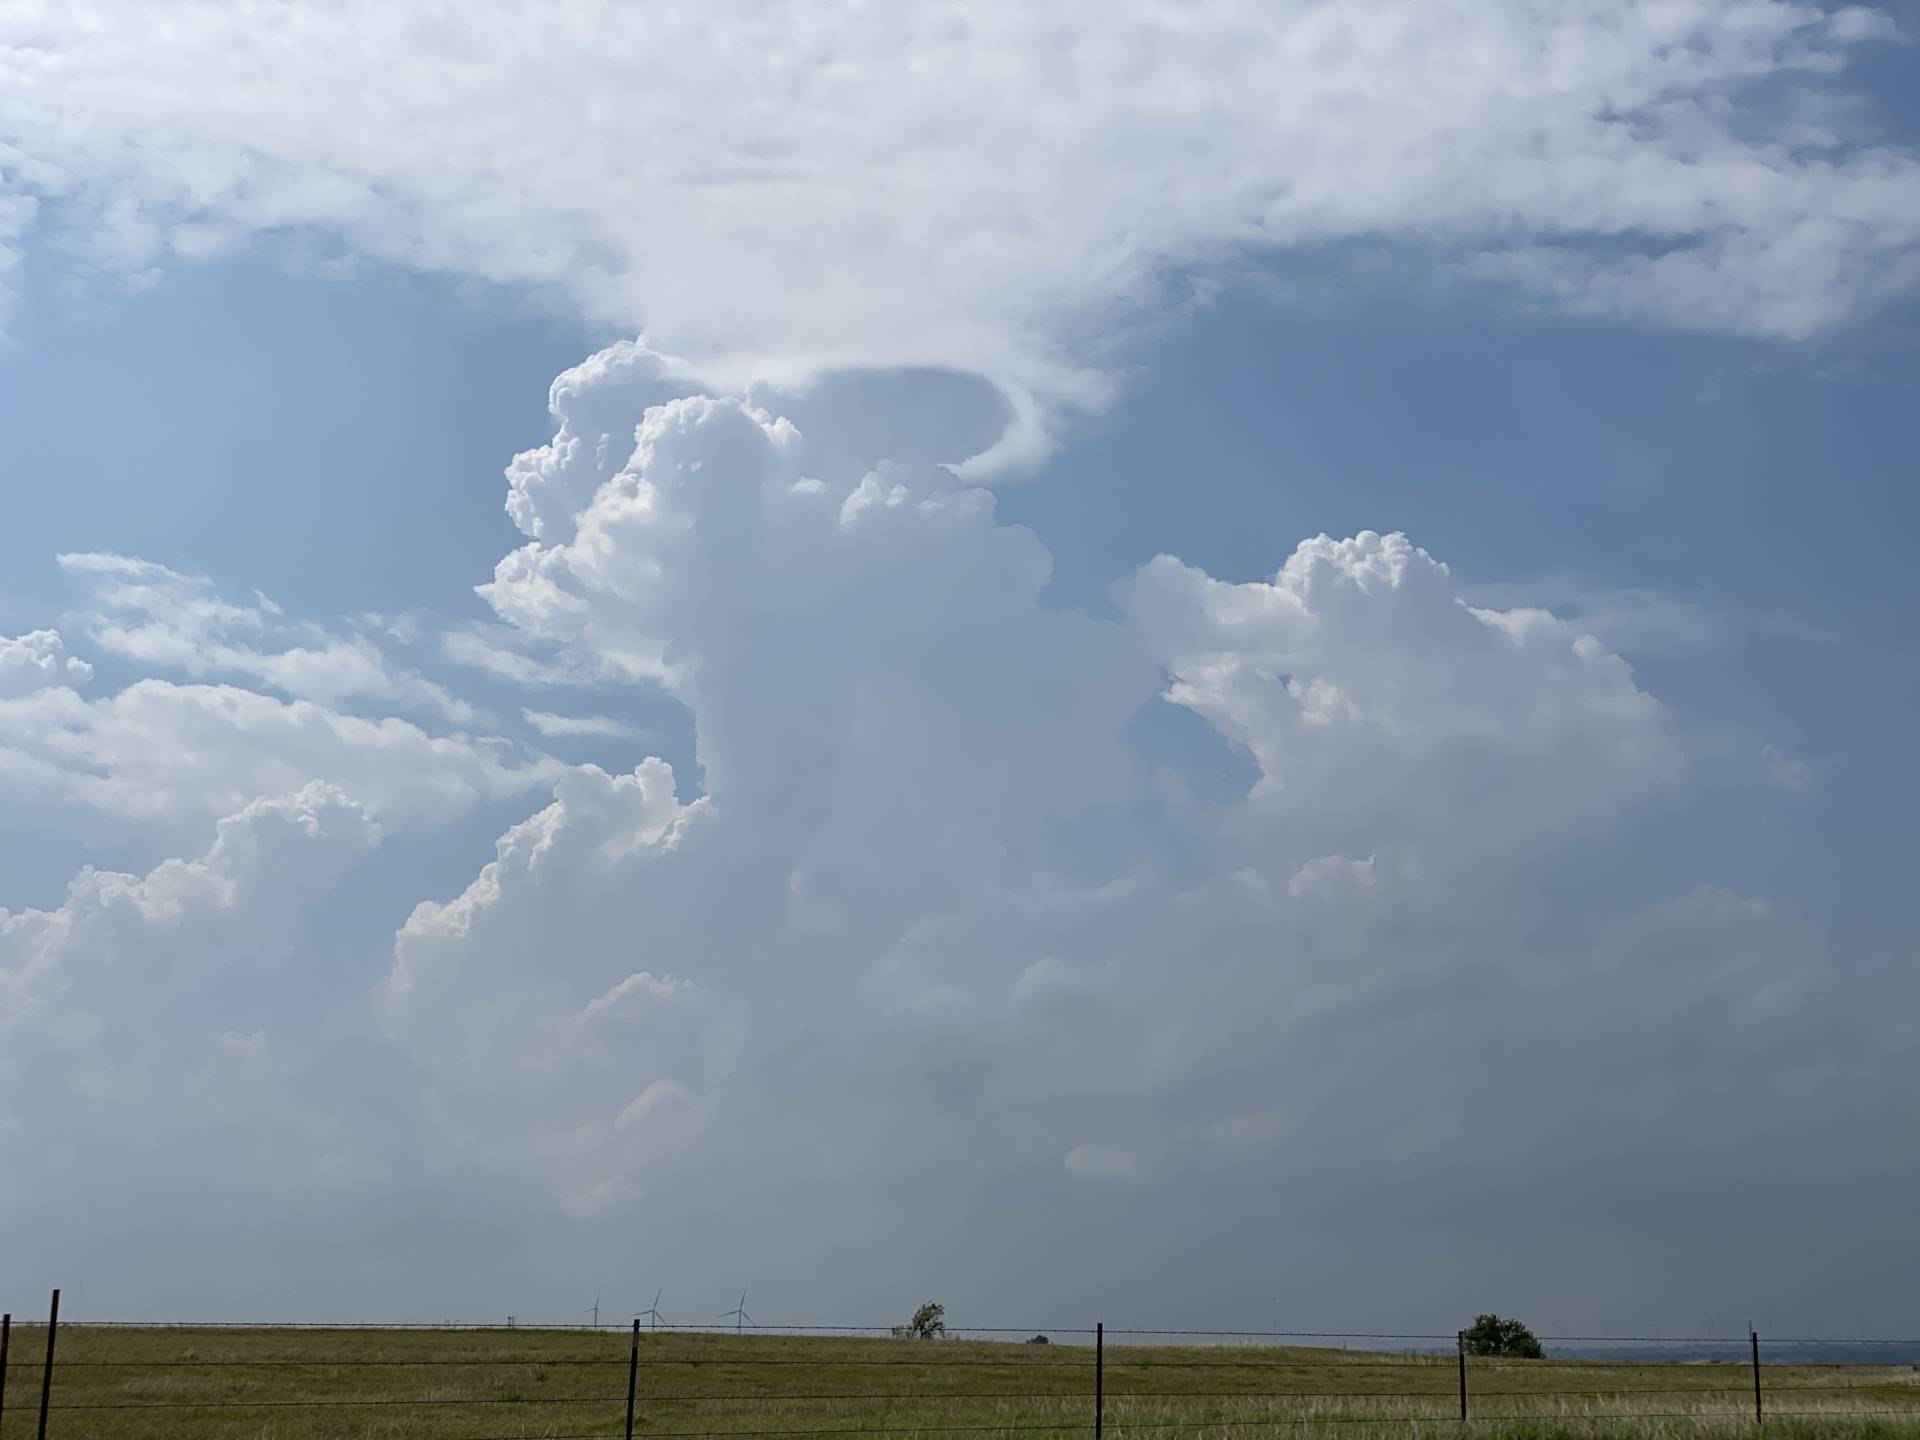 That pileus looks promising! NW of Weayher Weatherford, OK #okwx